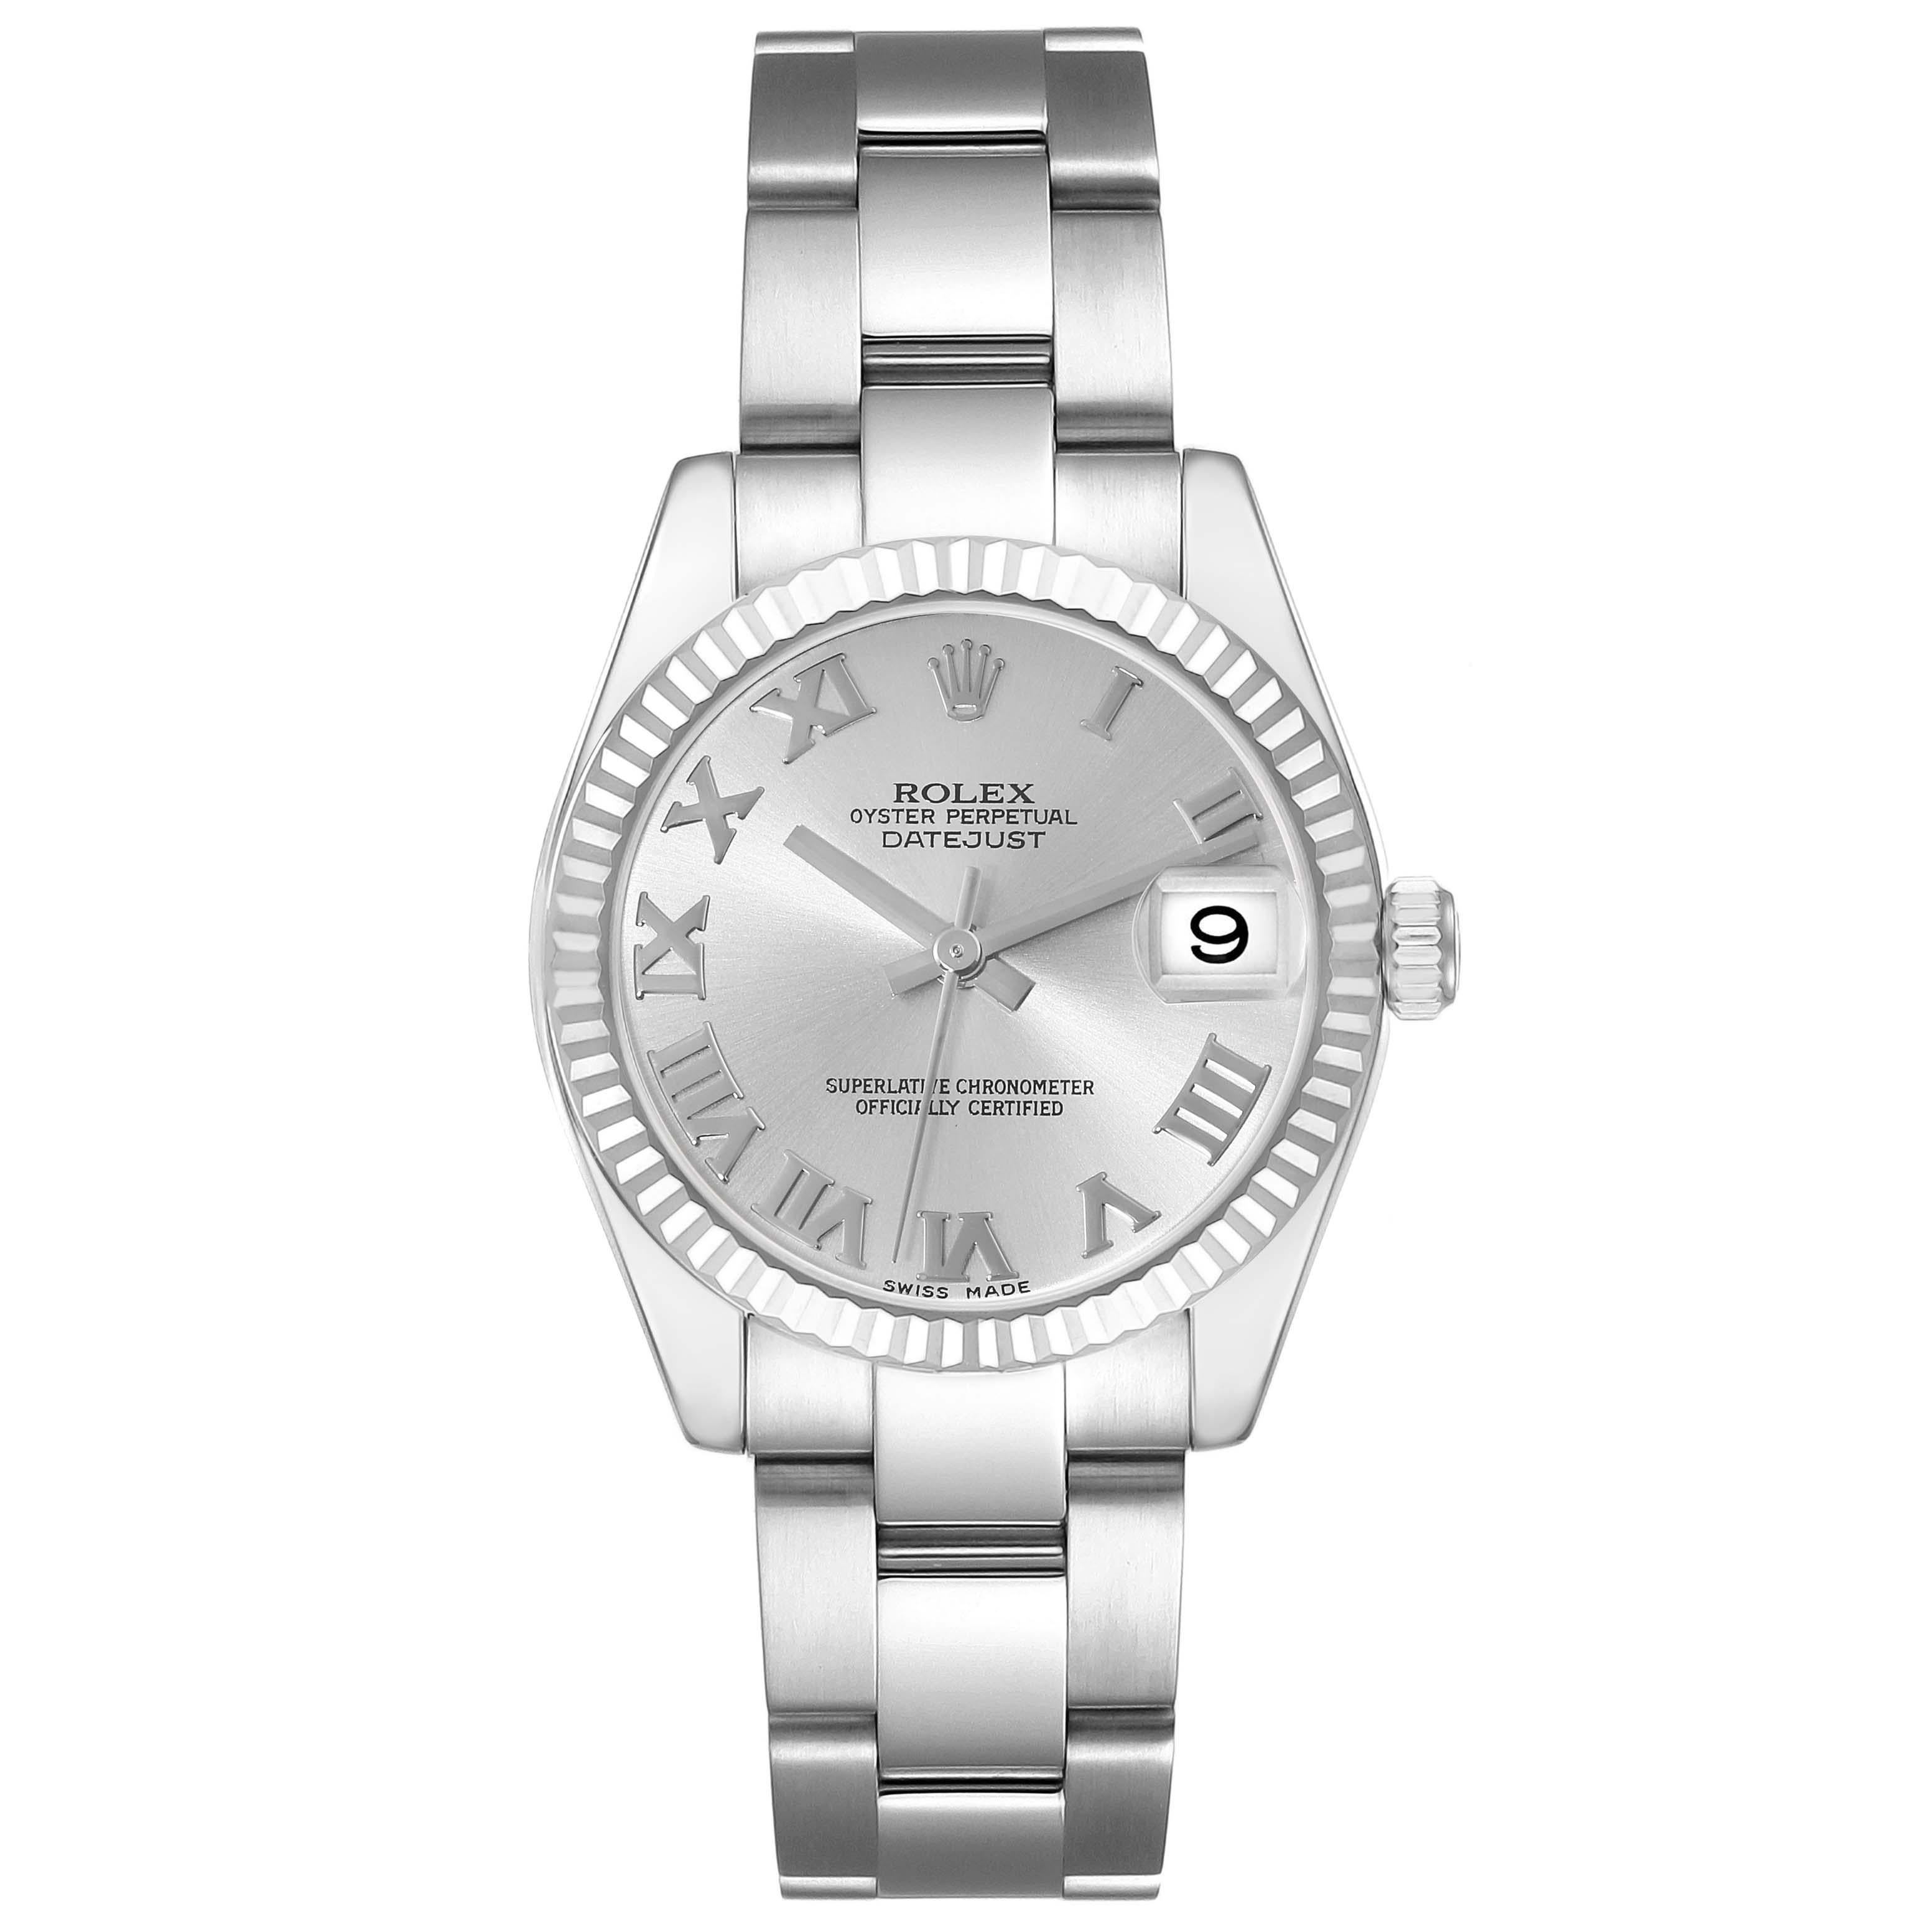 Rolex Datejust Midsize 31 Steel White Gold Ladies Watch 178274 Box Card. Officially certified chronometer automatic self-winding movement. Stainless steel oyster case 31.0 mm in diameter. Rolex logo on the crown. 18k white gold fluted bezel. Scratch